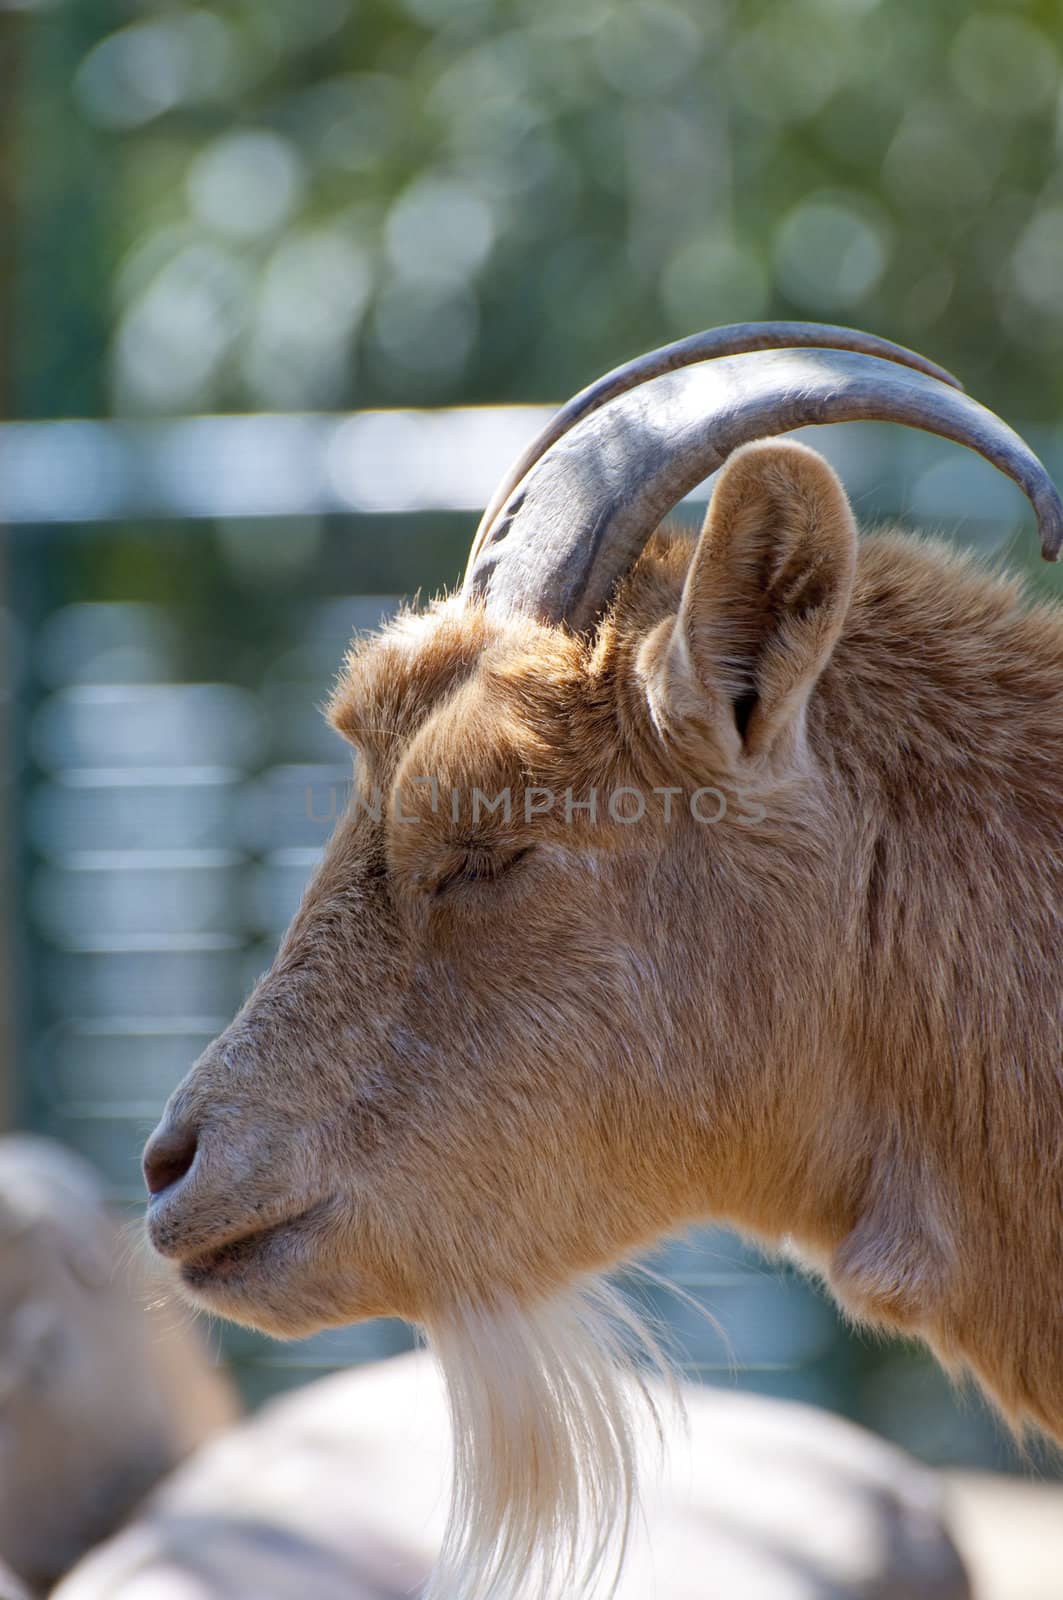 Picture of a goat with great horns.